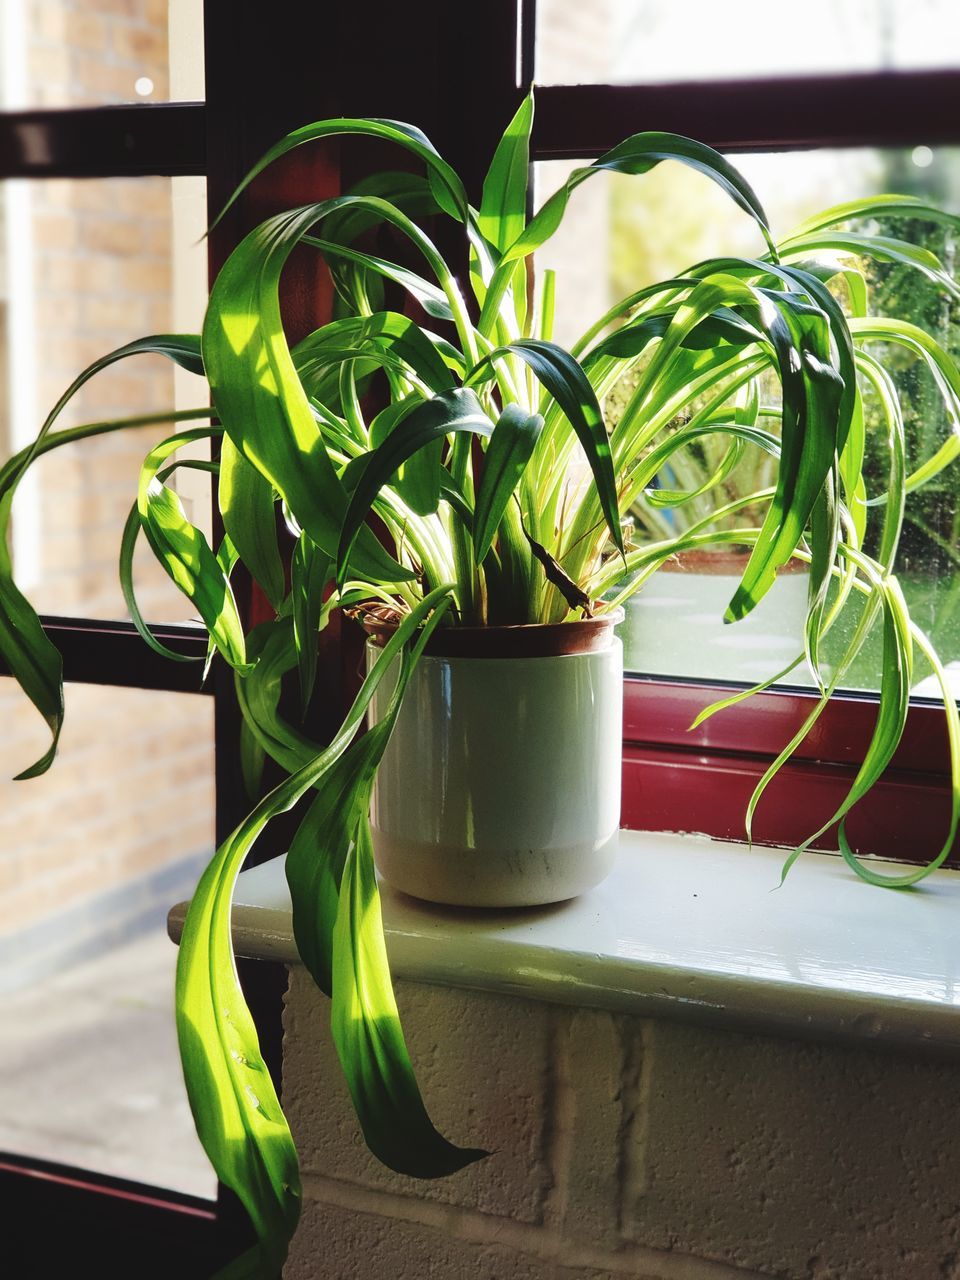 green, plant, indoors, flower, window, potted plant, nature, floristry, growth, plant part, leaf, no people, houseplant, home interior, food and drink, freshness, floral design, food, window sill, home, domestic room, flowerpot, glass, table, day, kitchen, close-up, yellow, domestic kitchen